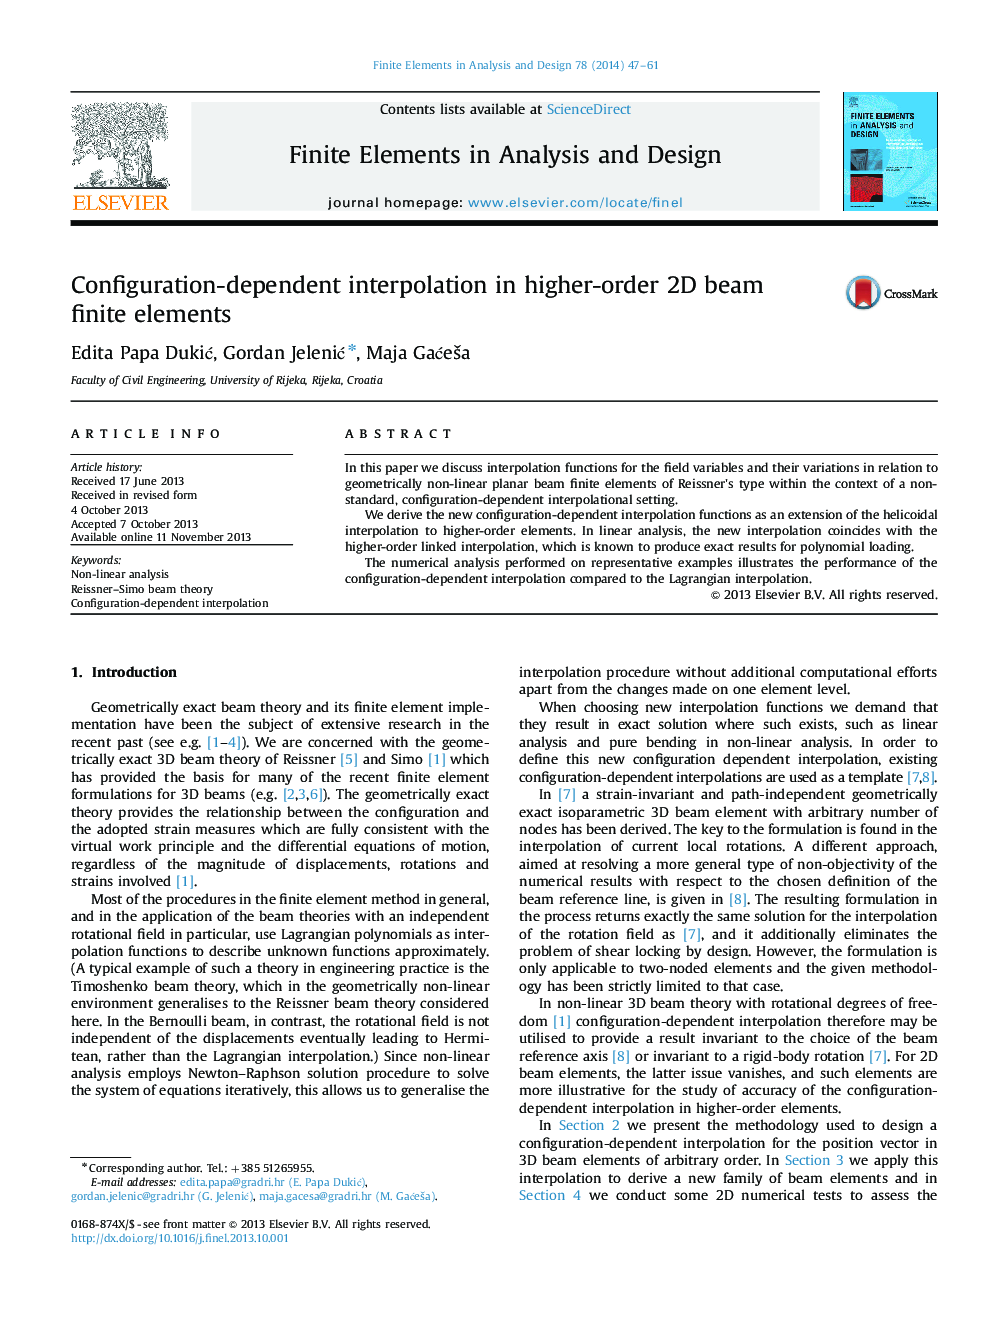 Configuration-dependent interpolation in higher-order 2D beam finite elements